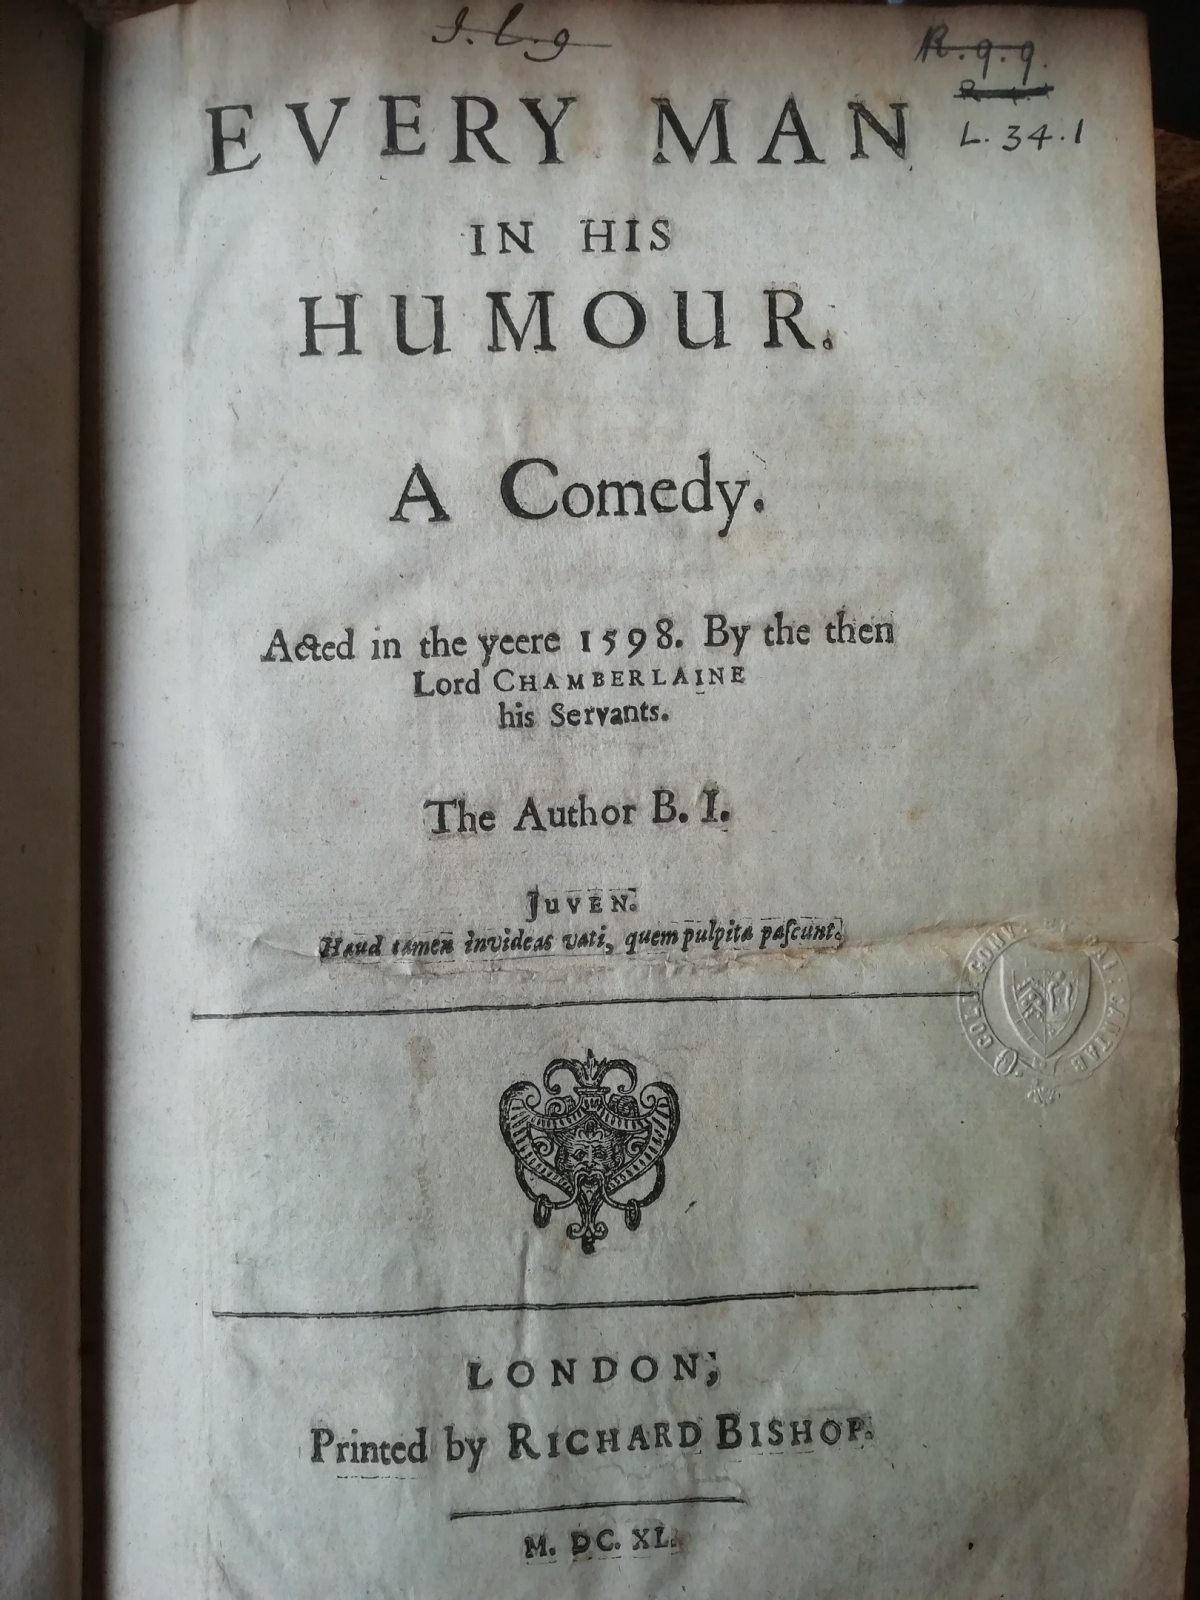 Every Man in his Humour title page